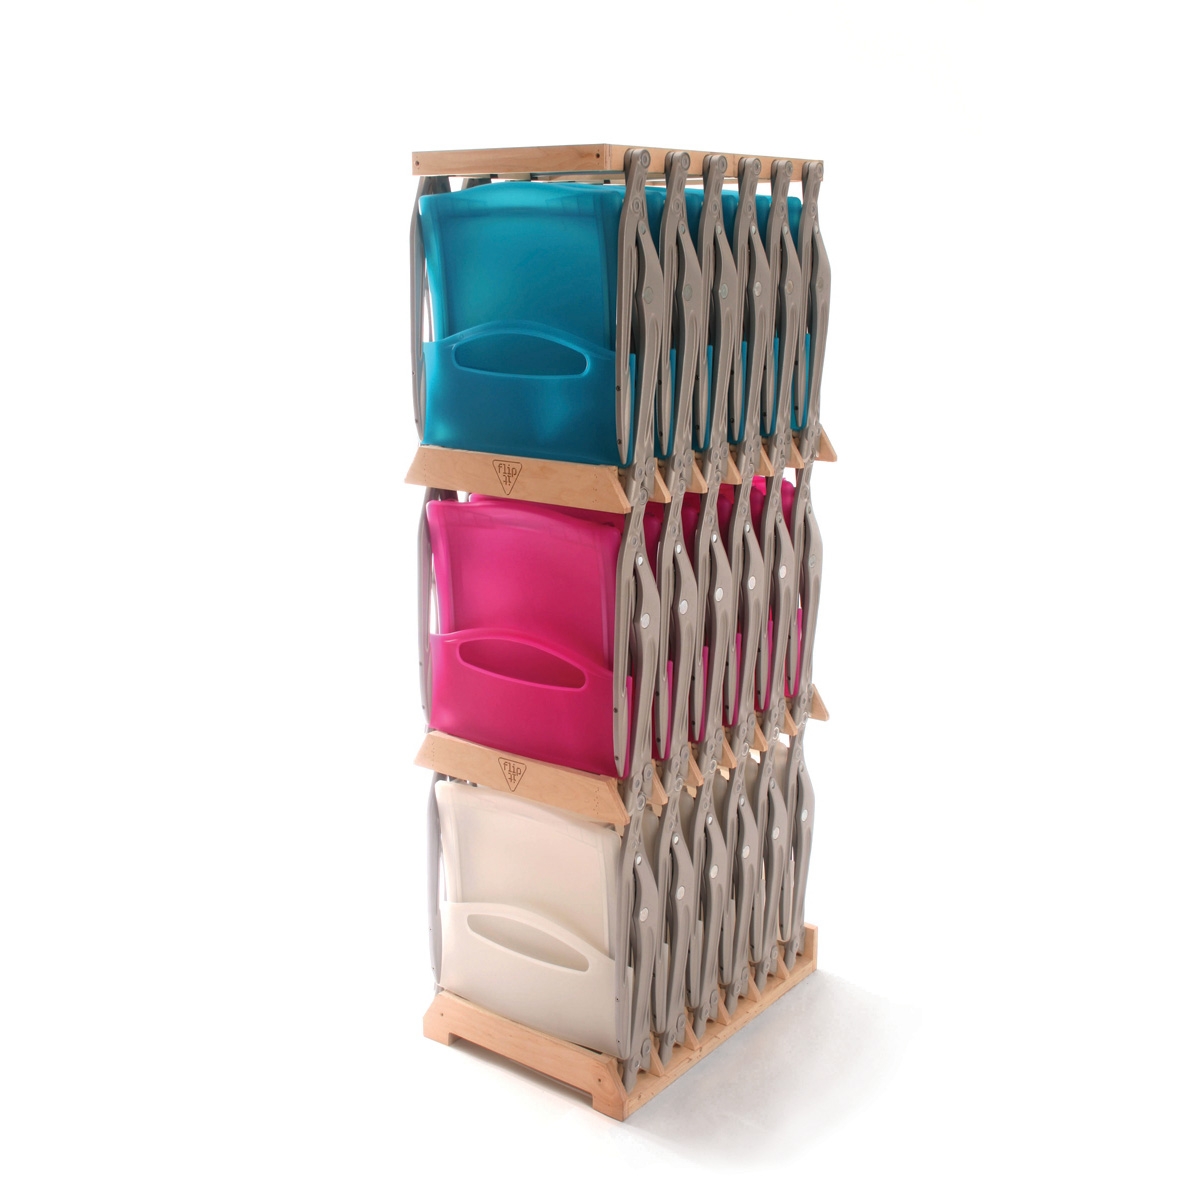 Flipit Chair - stacked chair